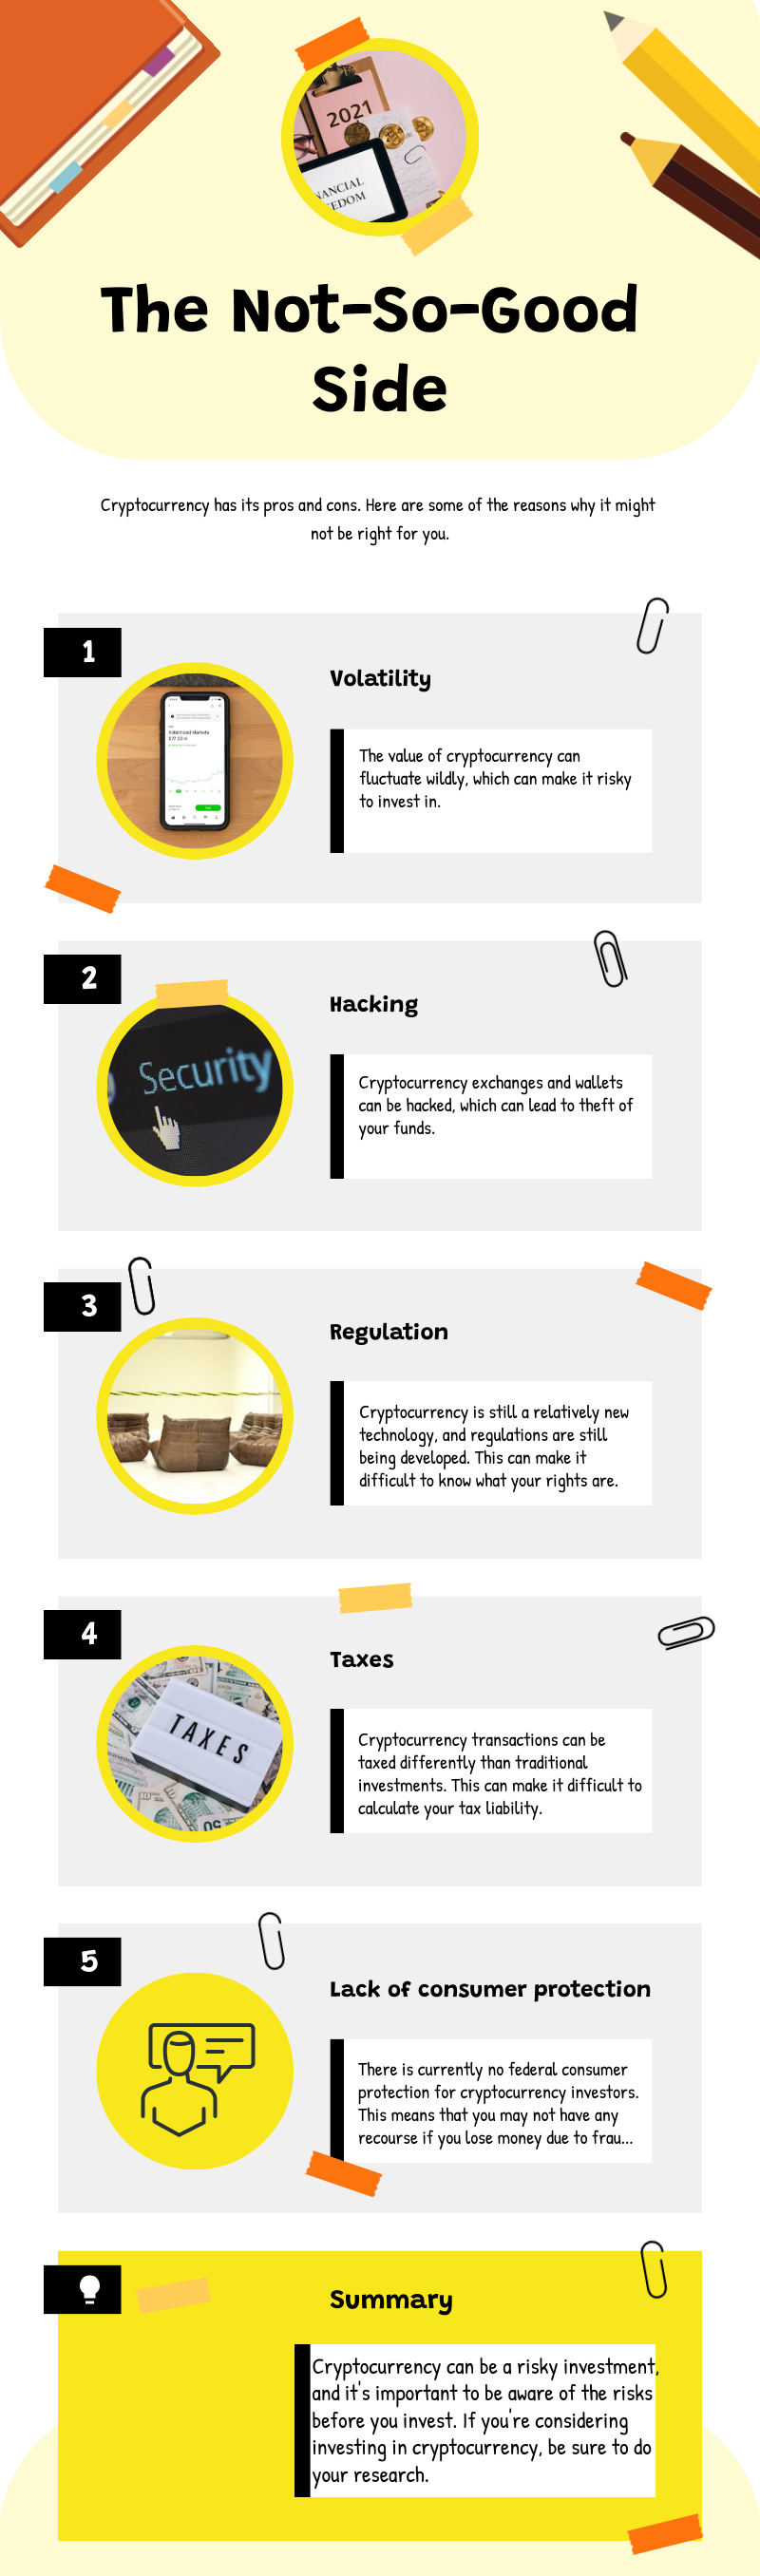 Infographic with the title "The Not-So-Good Side" lists downsides of cryptocurrency investment, including volatility, hacking, regulation, taxes, and lack of consumer protection, with corresponding icons and brief explanations.